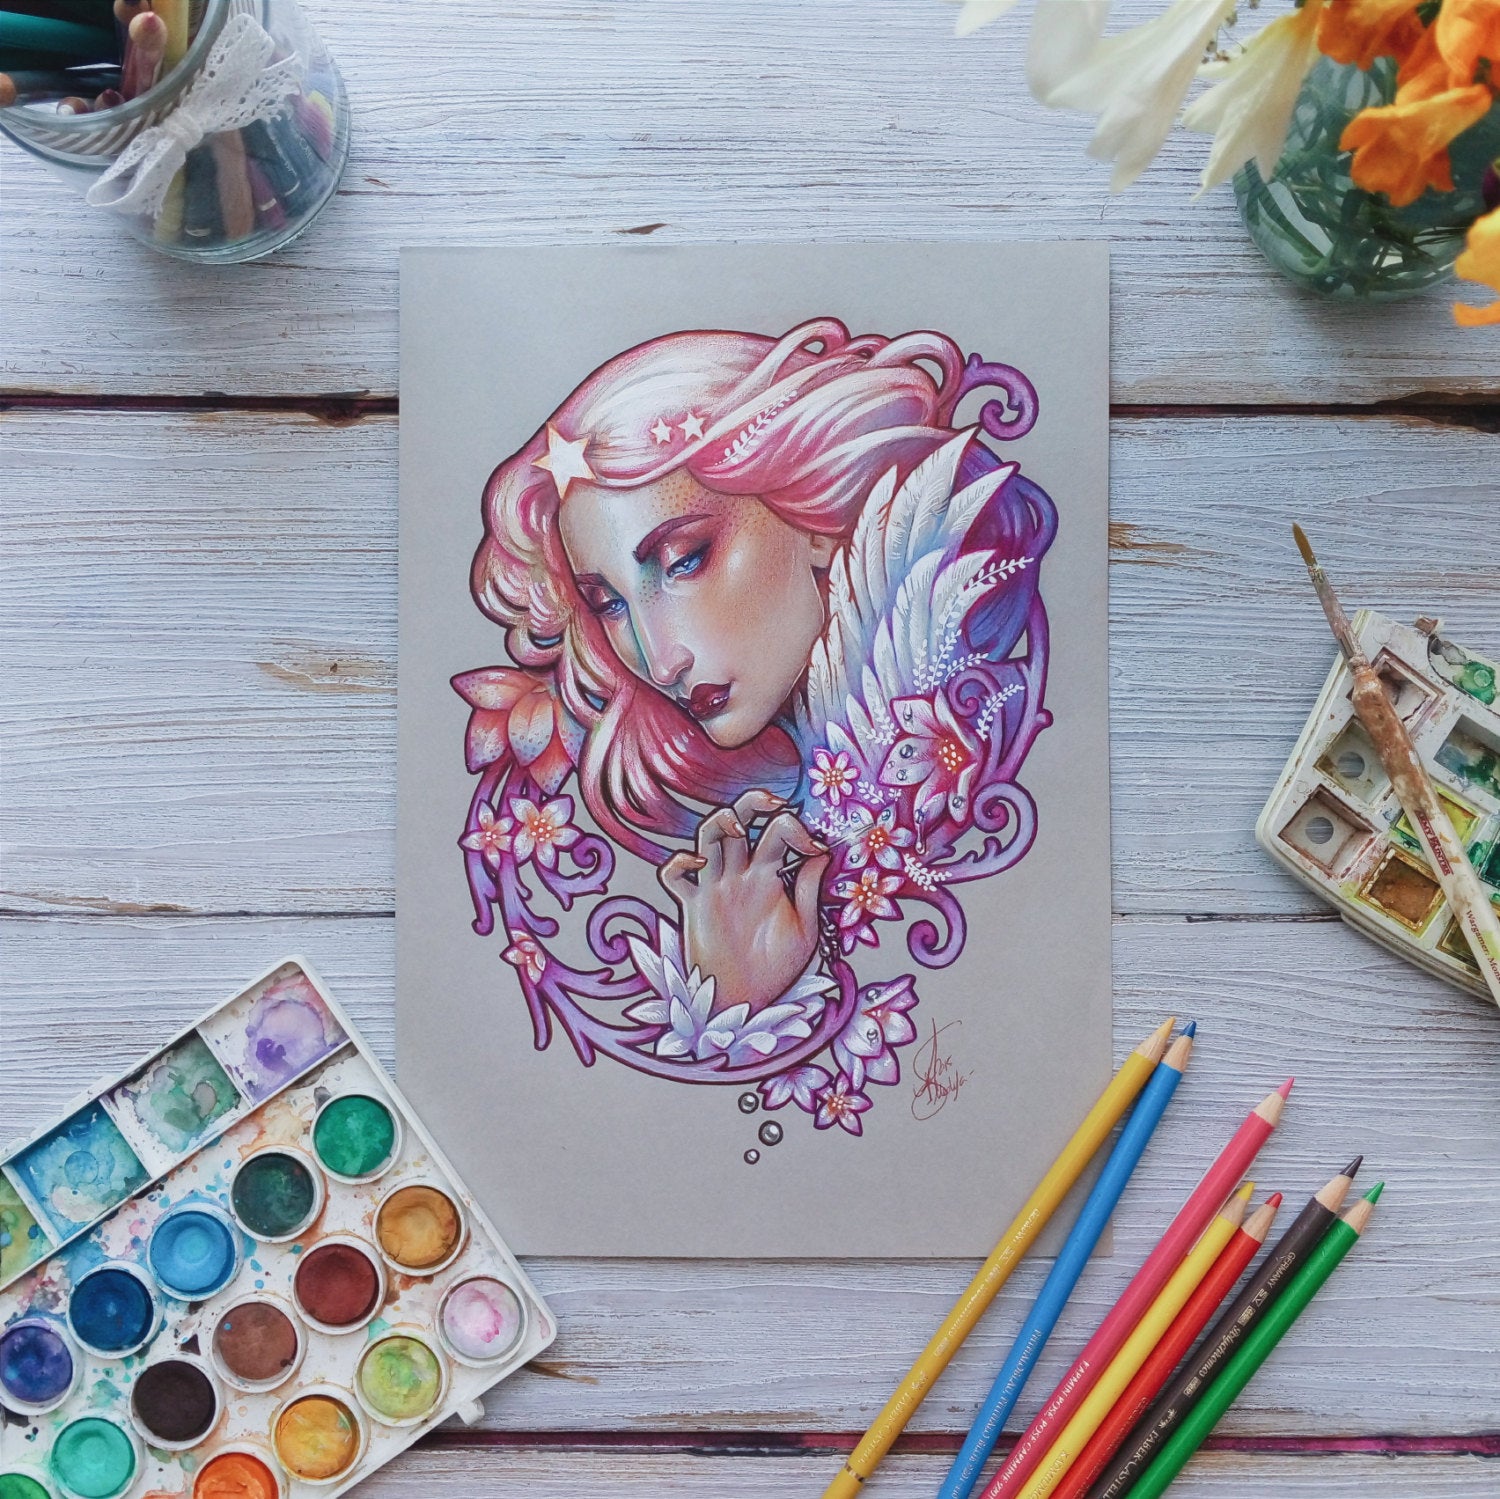 morning star medusa dollmaker red hair stars and wings woman astronomy morning art pastel colours redhair art nouveau